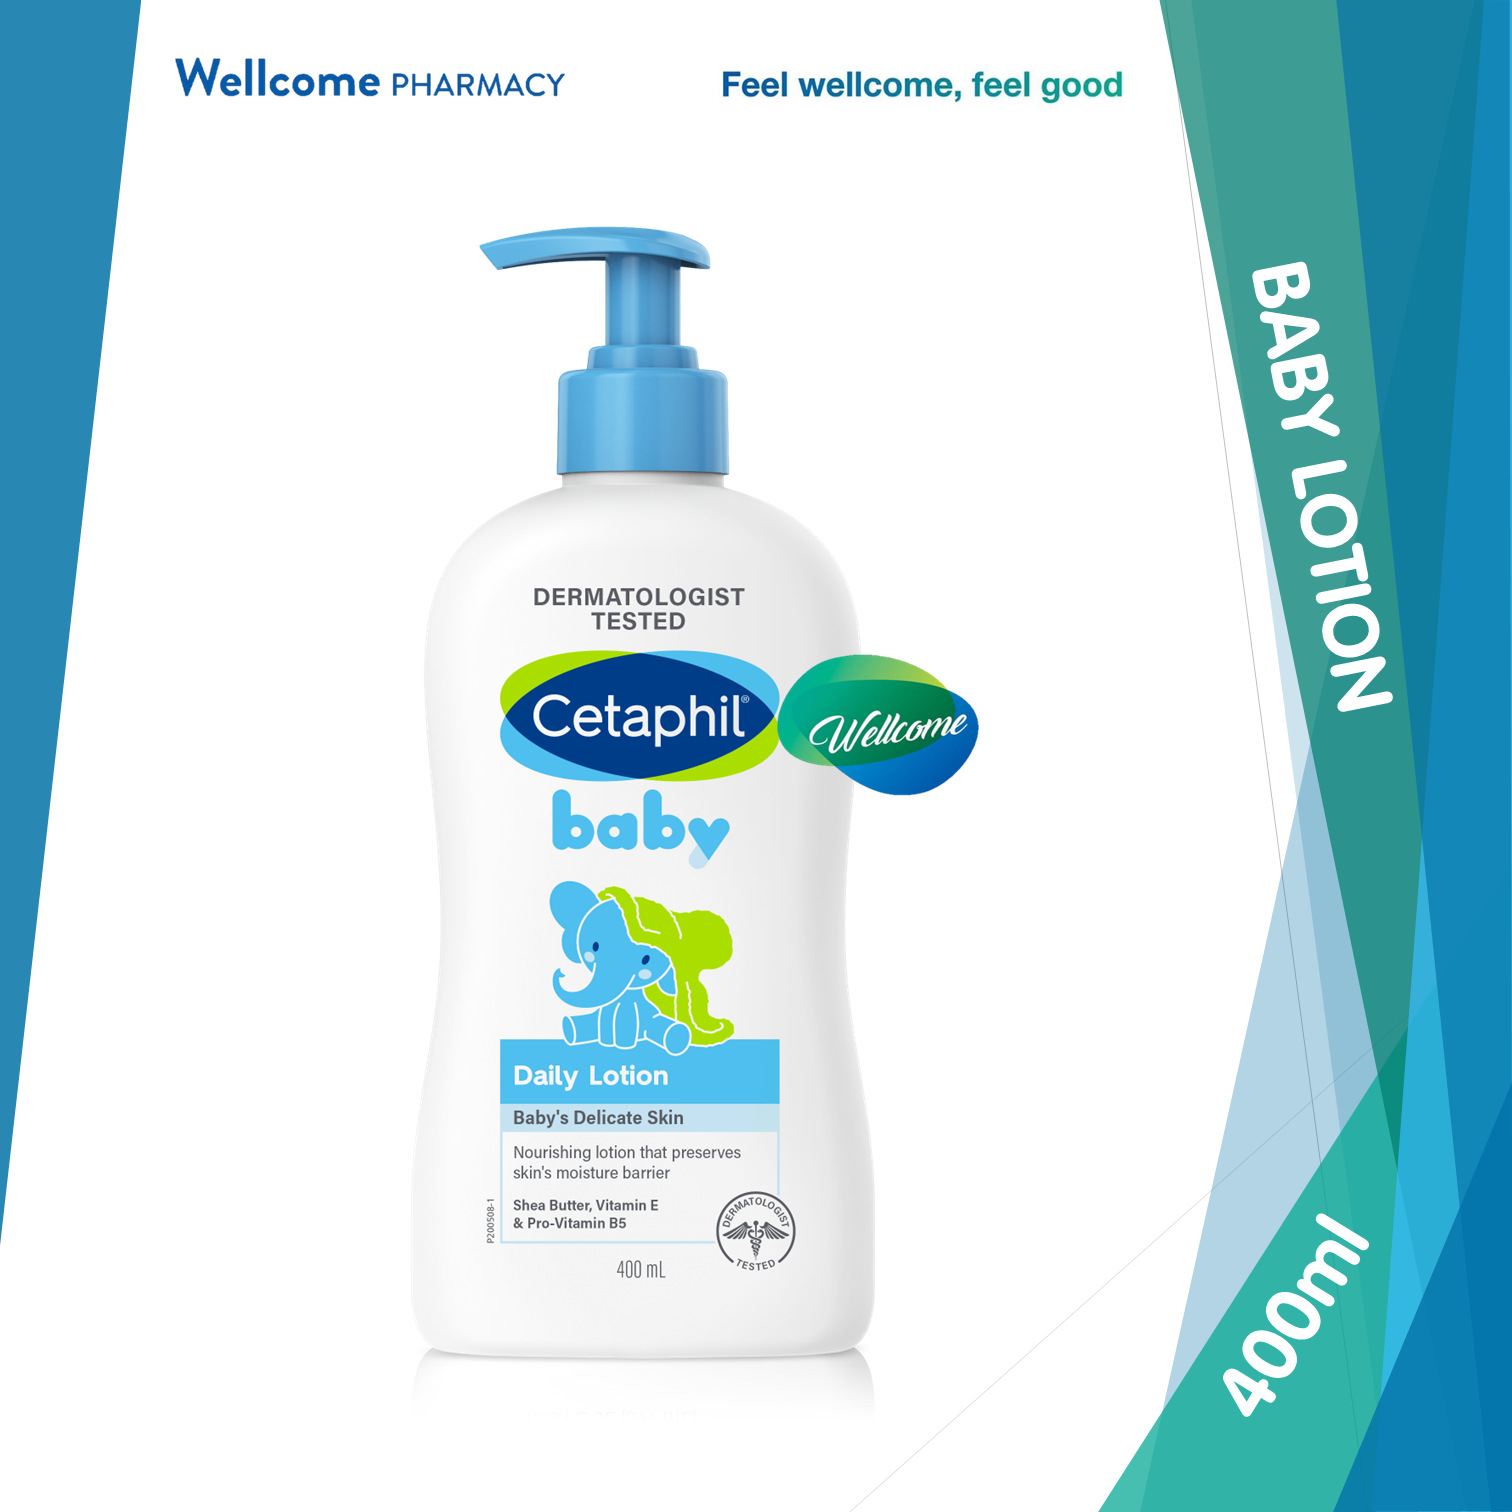 Cetaphil Baby Daily Lotion - 400ml